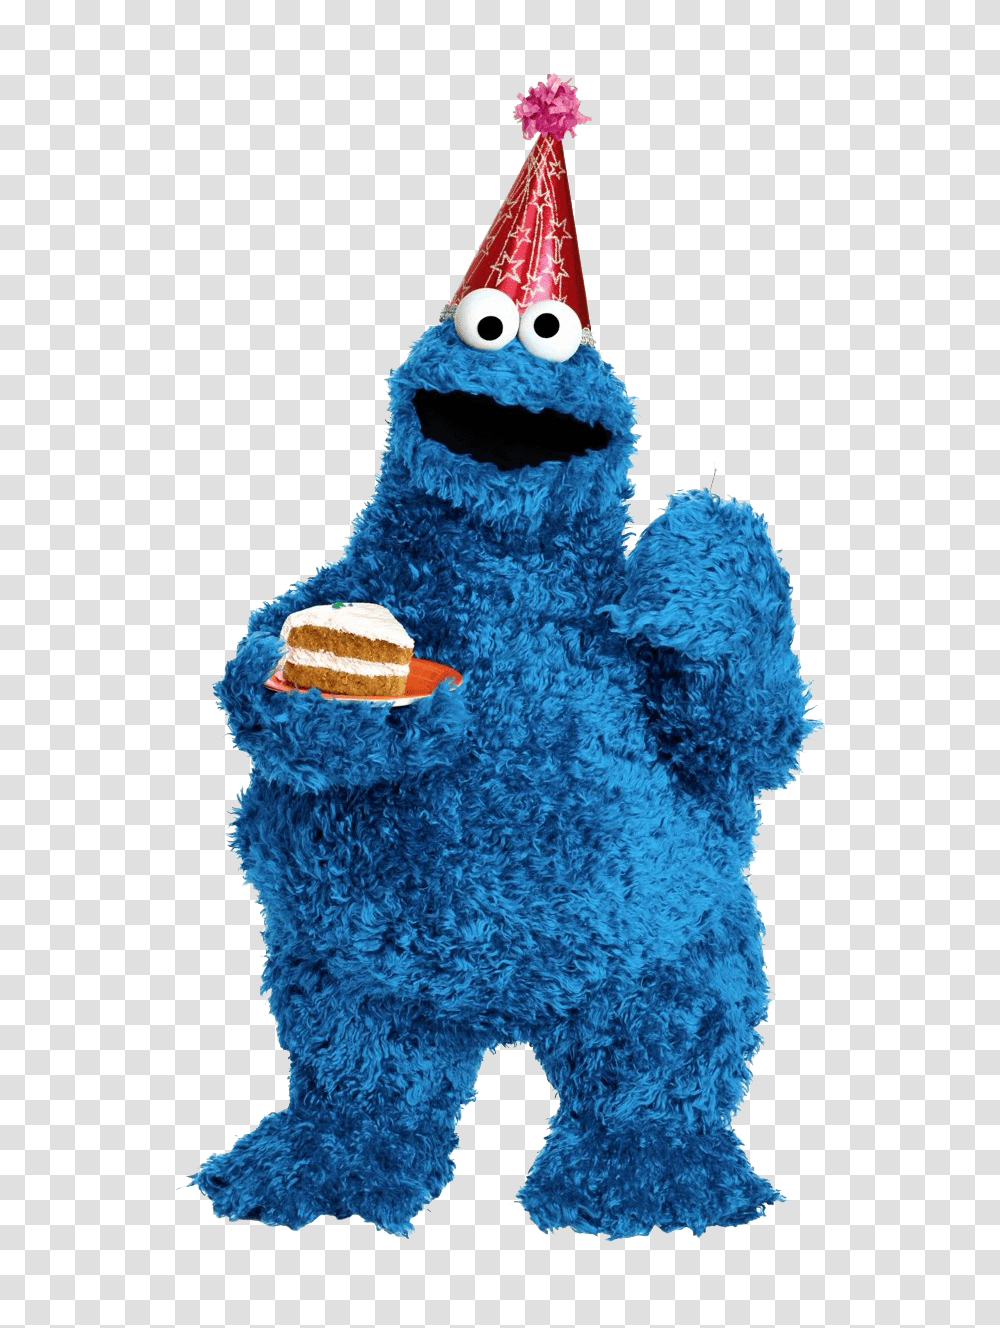 Cookie Monster Clip Art 5 2 Cookie Monster Birthday Card, Toy, Pinata, Clothing, Apparel Transparent Png